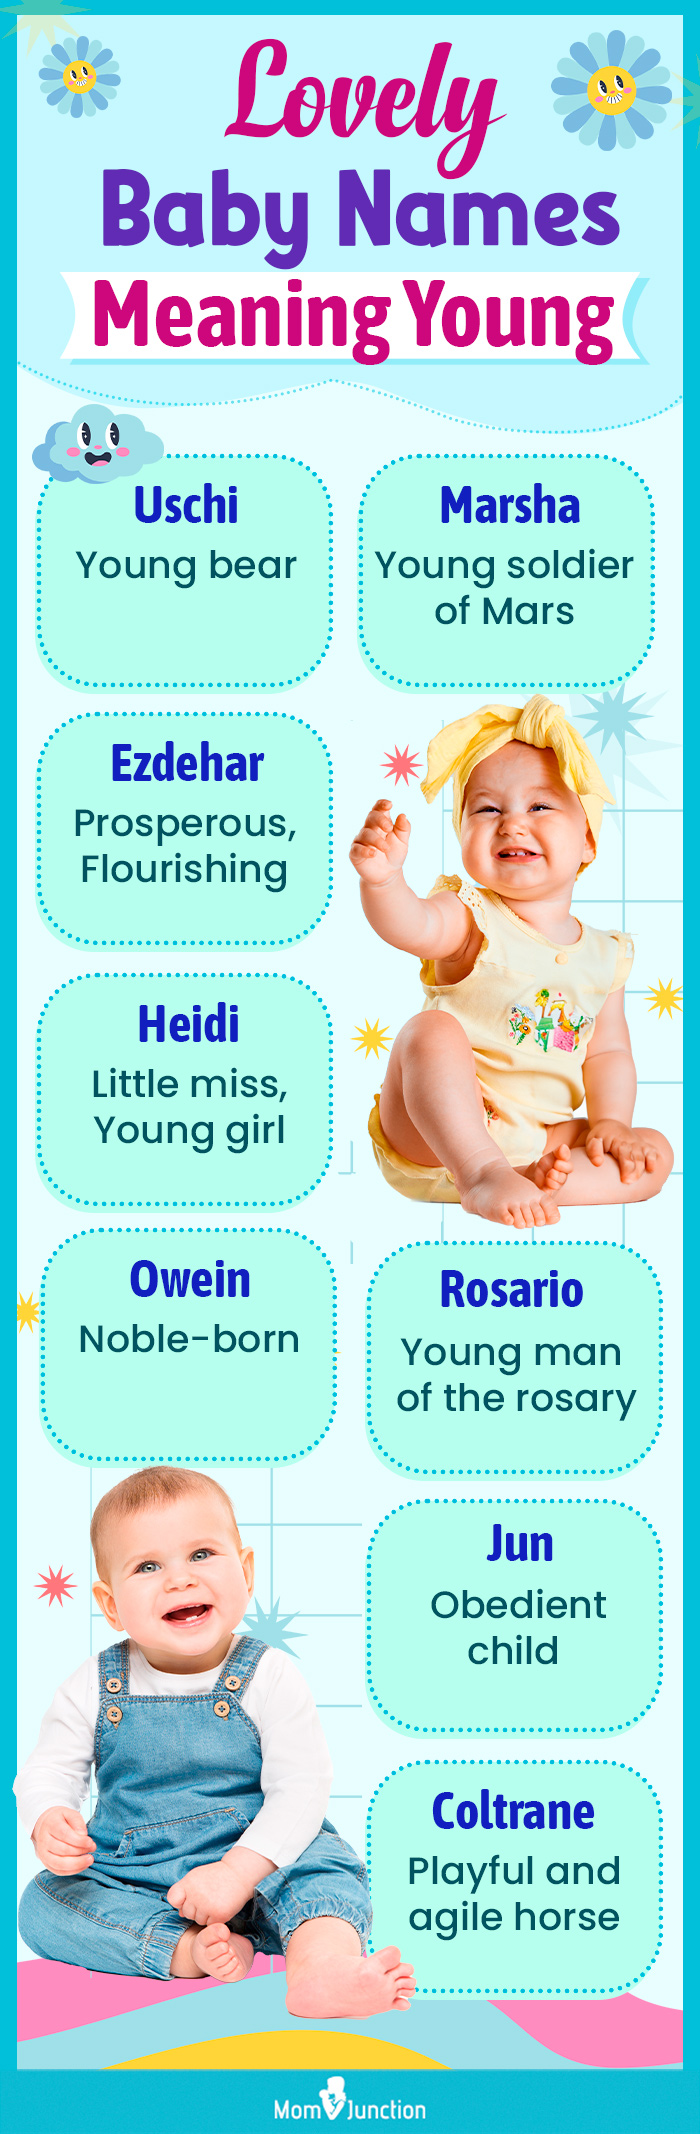 energetic baby names meaning young (infographic)